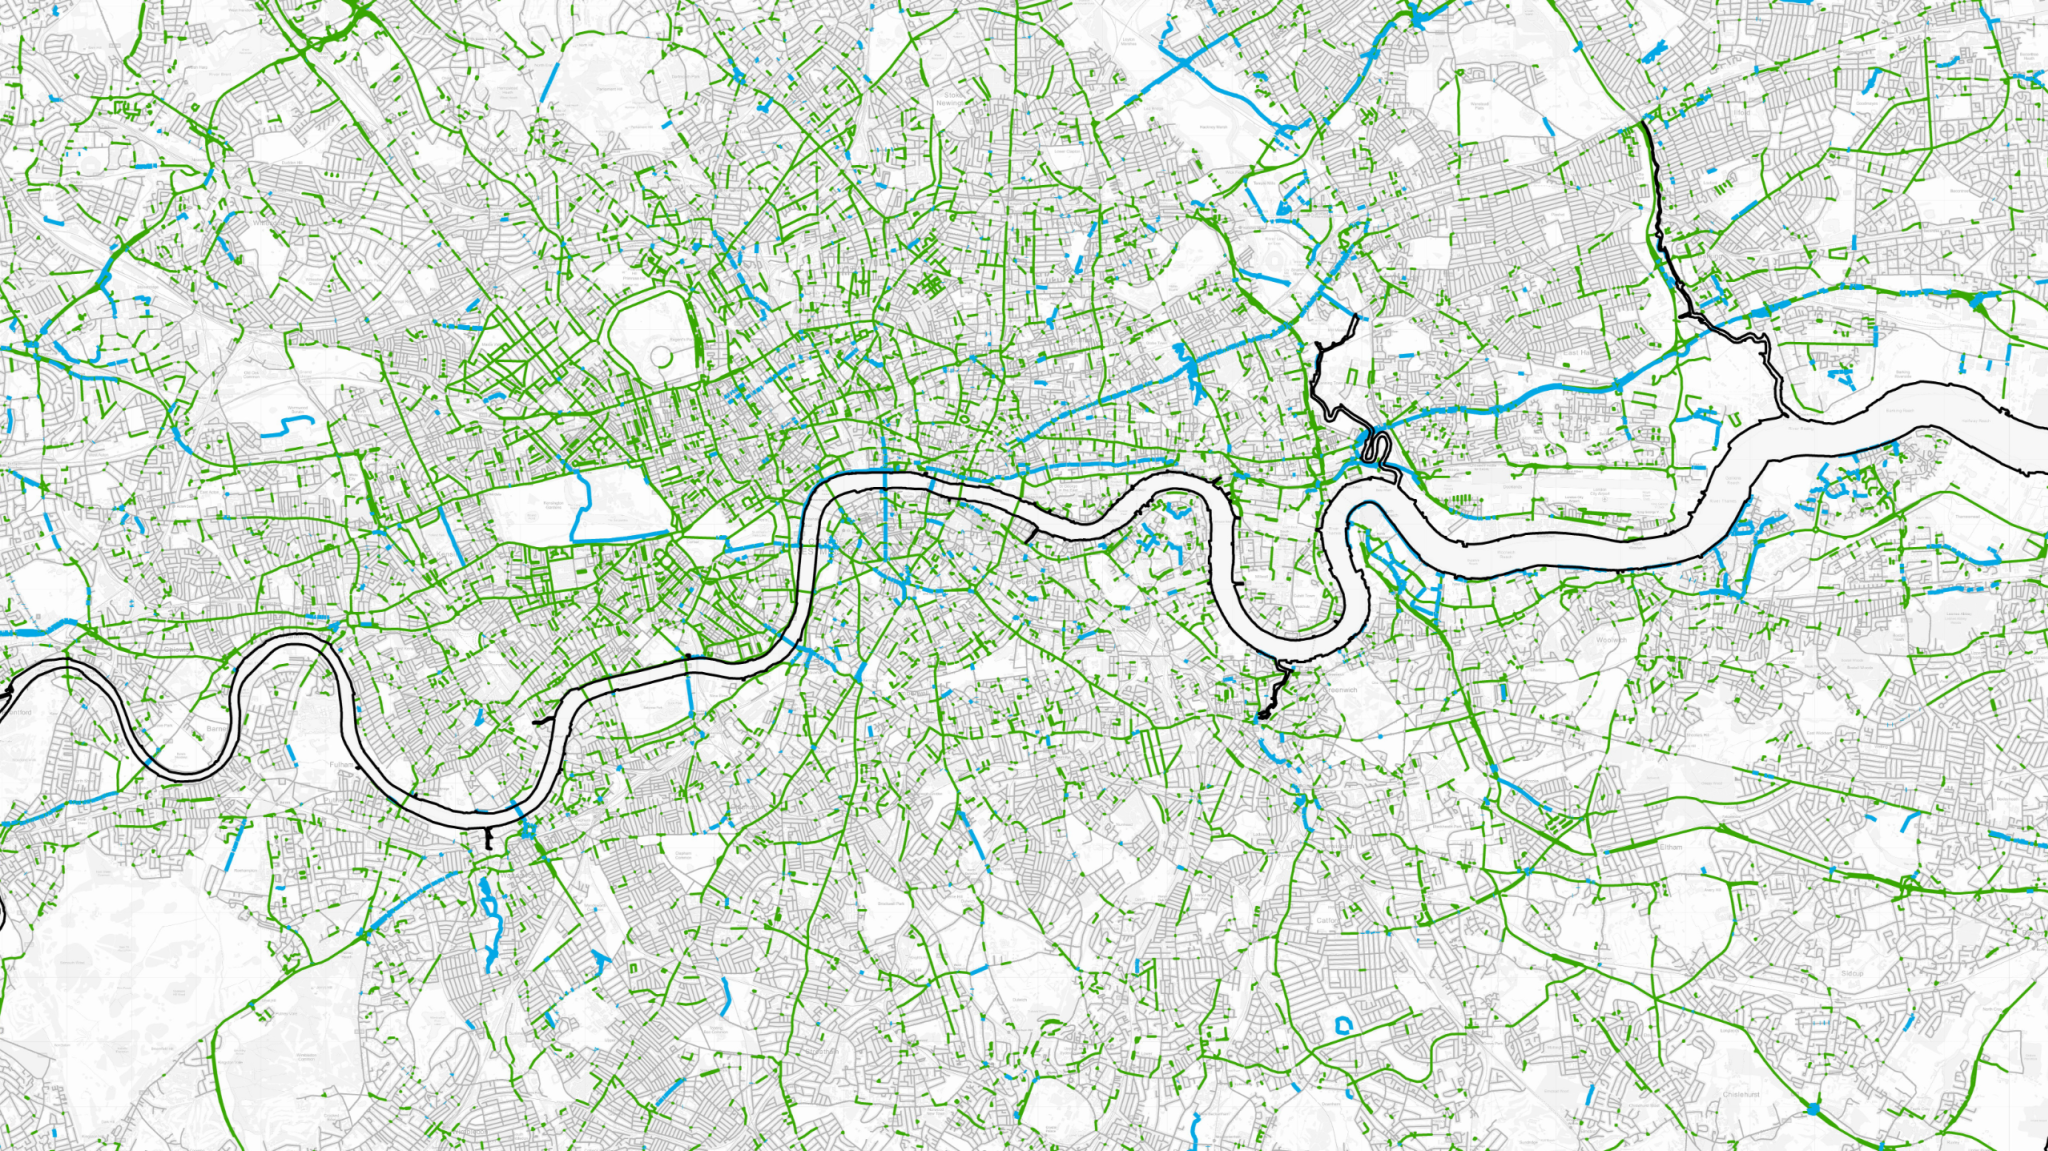 Map of London with streets highlighted in green. Concentration to northwest, close to river, thinning out east, south, and further to northwest